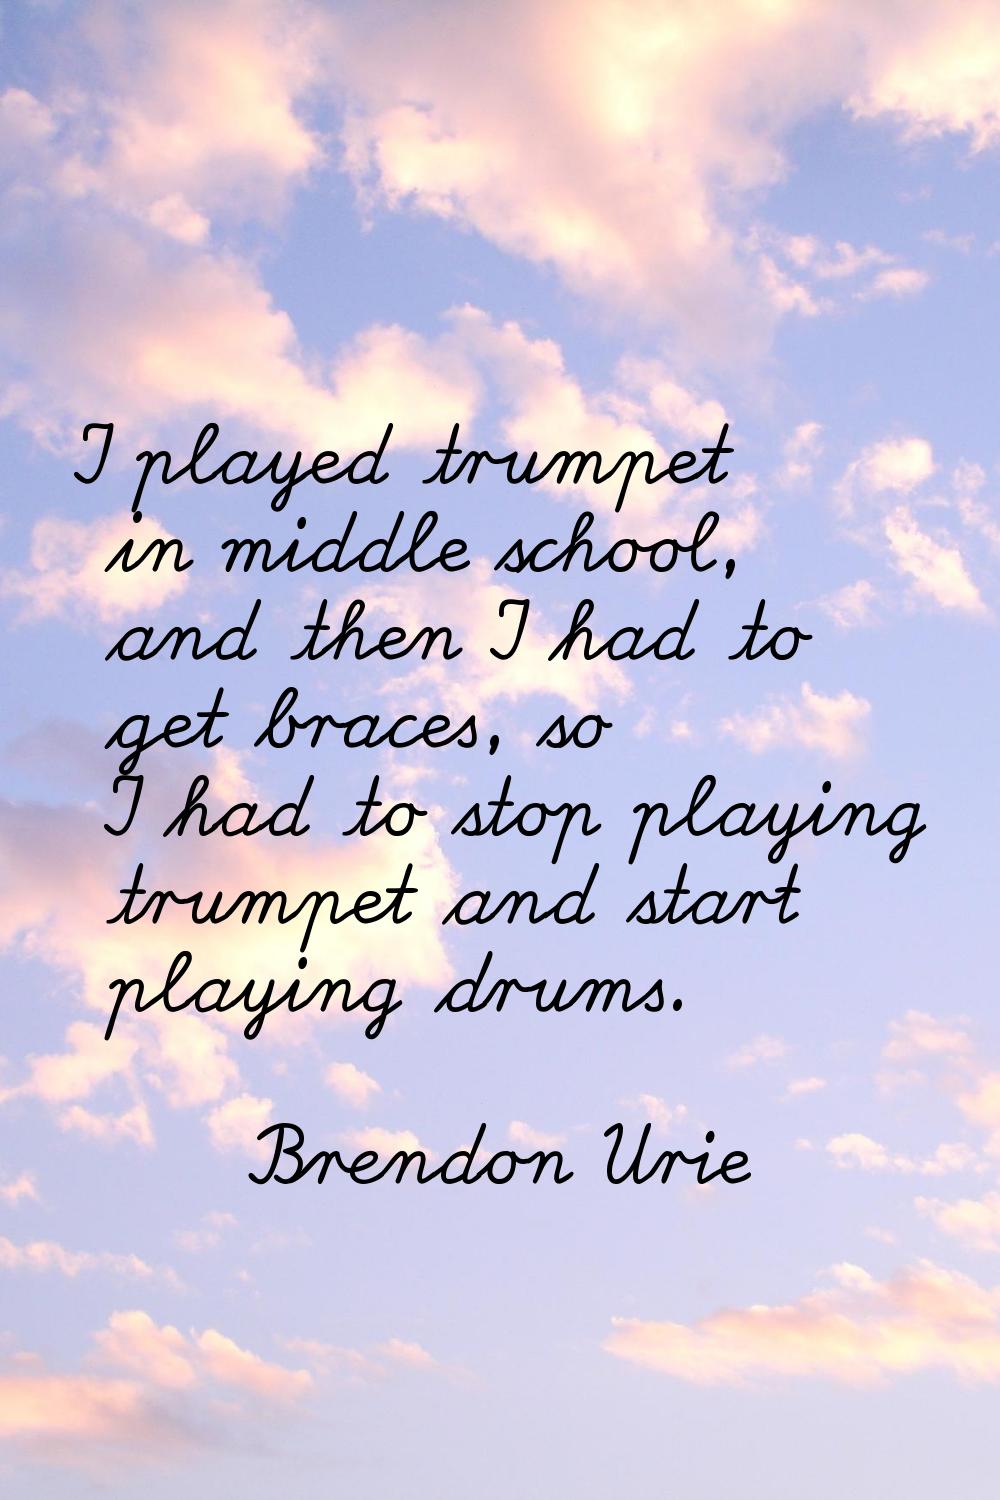 I played trumpet in middle school, and then I had to get braces, so I had to stop playing trumpet a